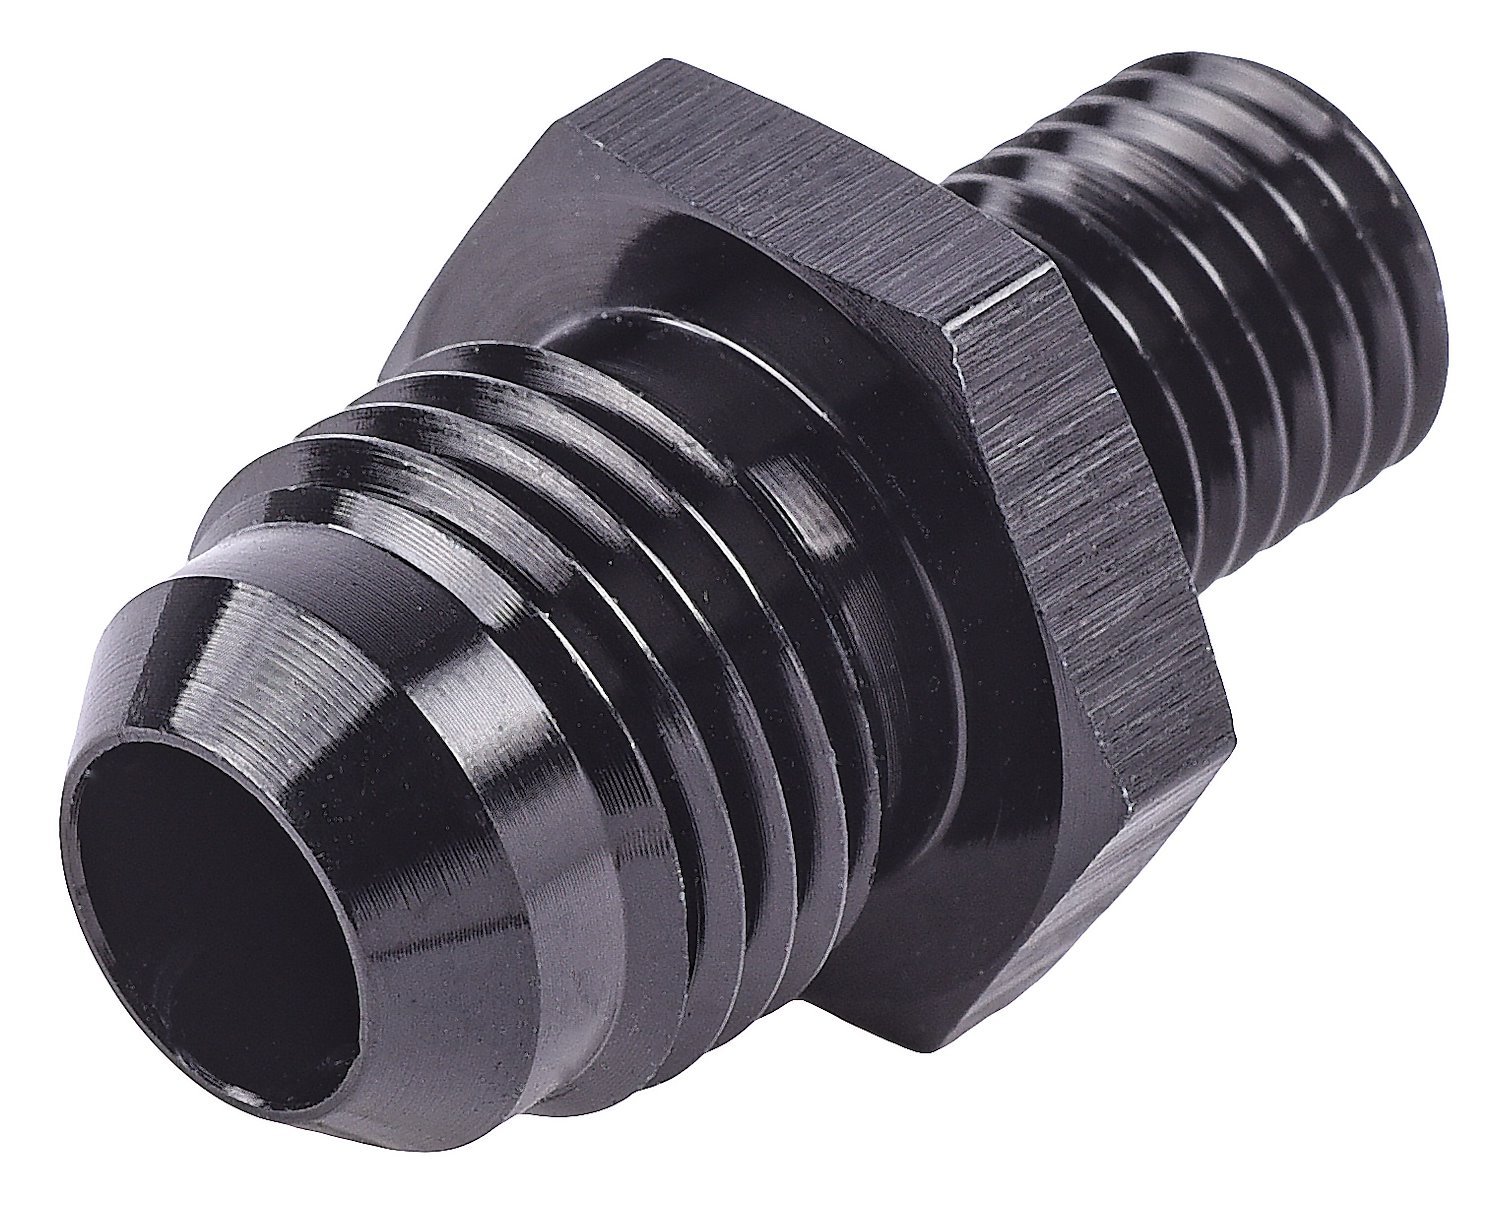 AN to Metric Adapter Fitting [-6 AN Male to 10mm x 1.25 Male, Black]